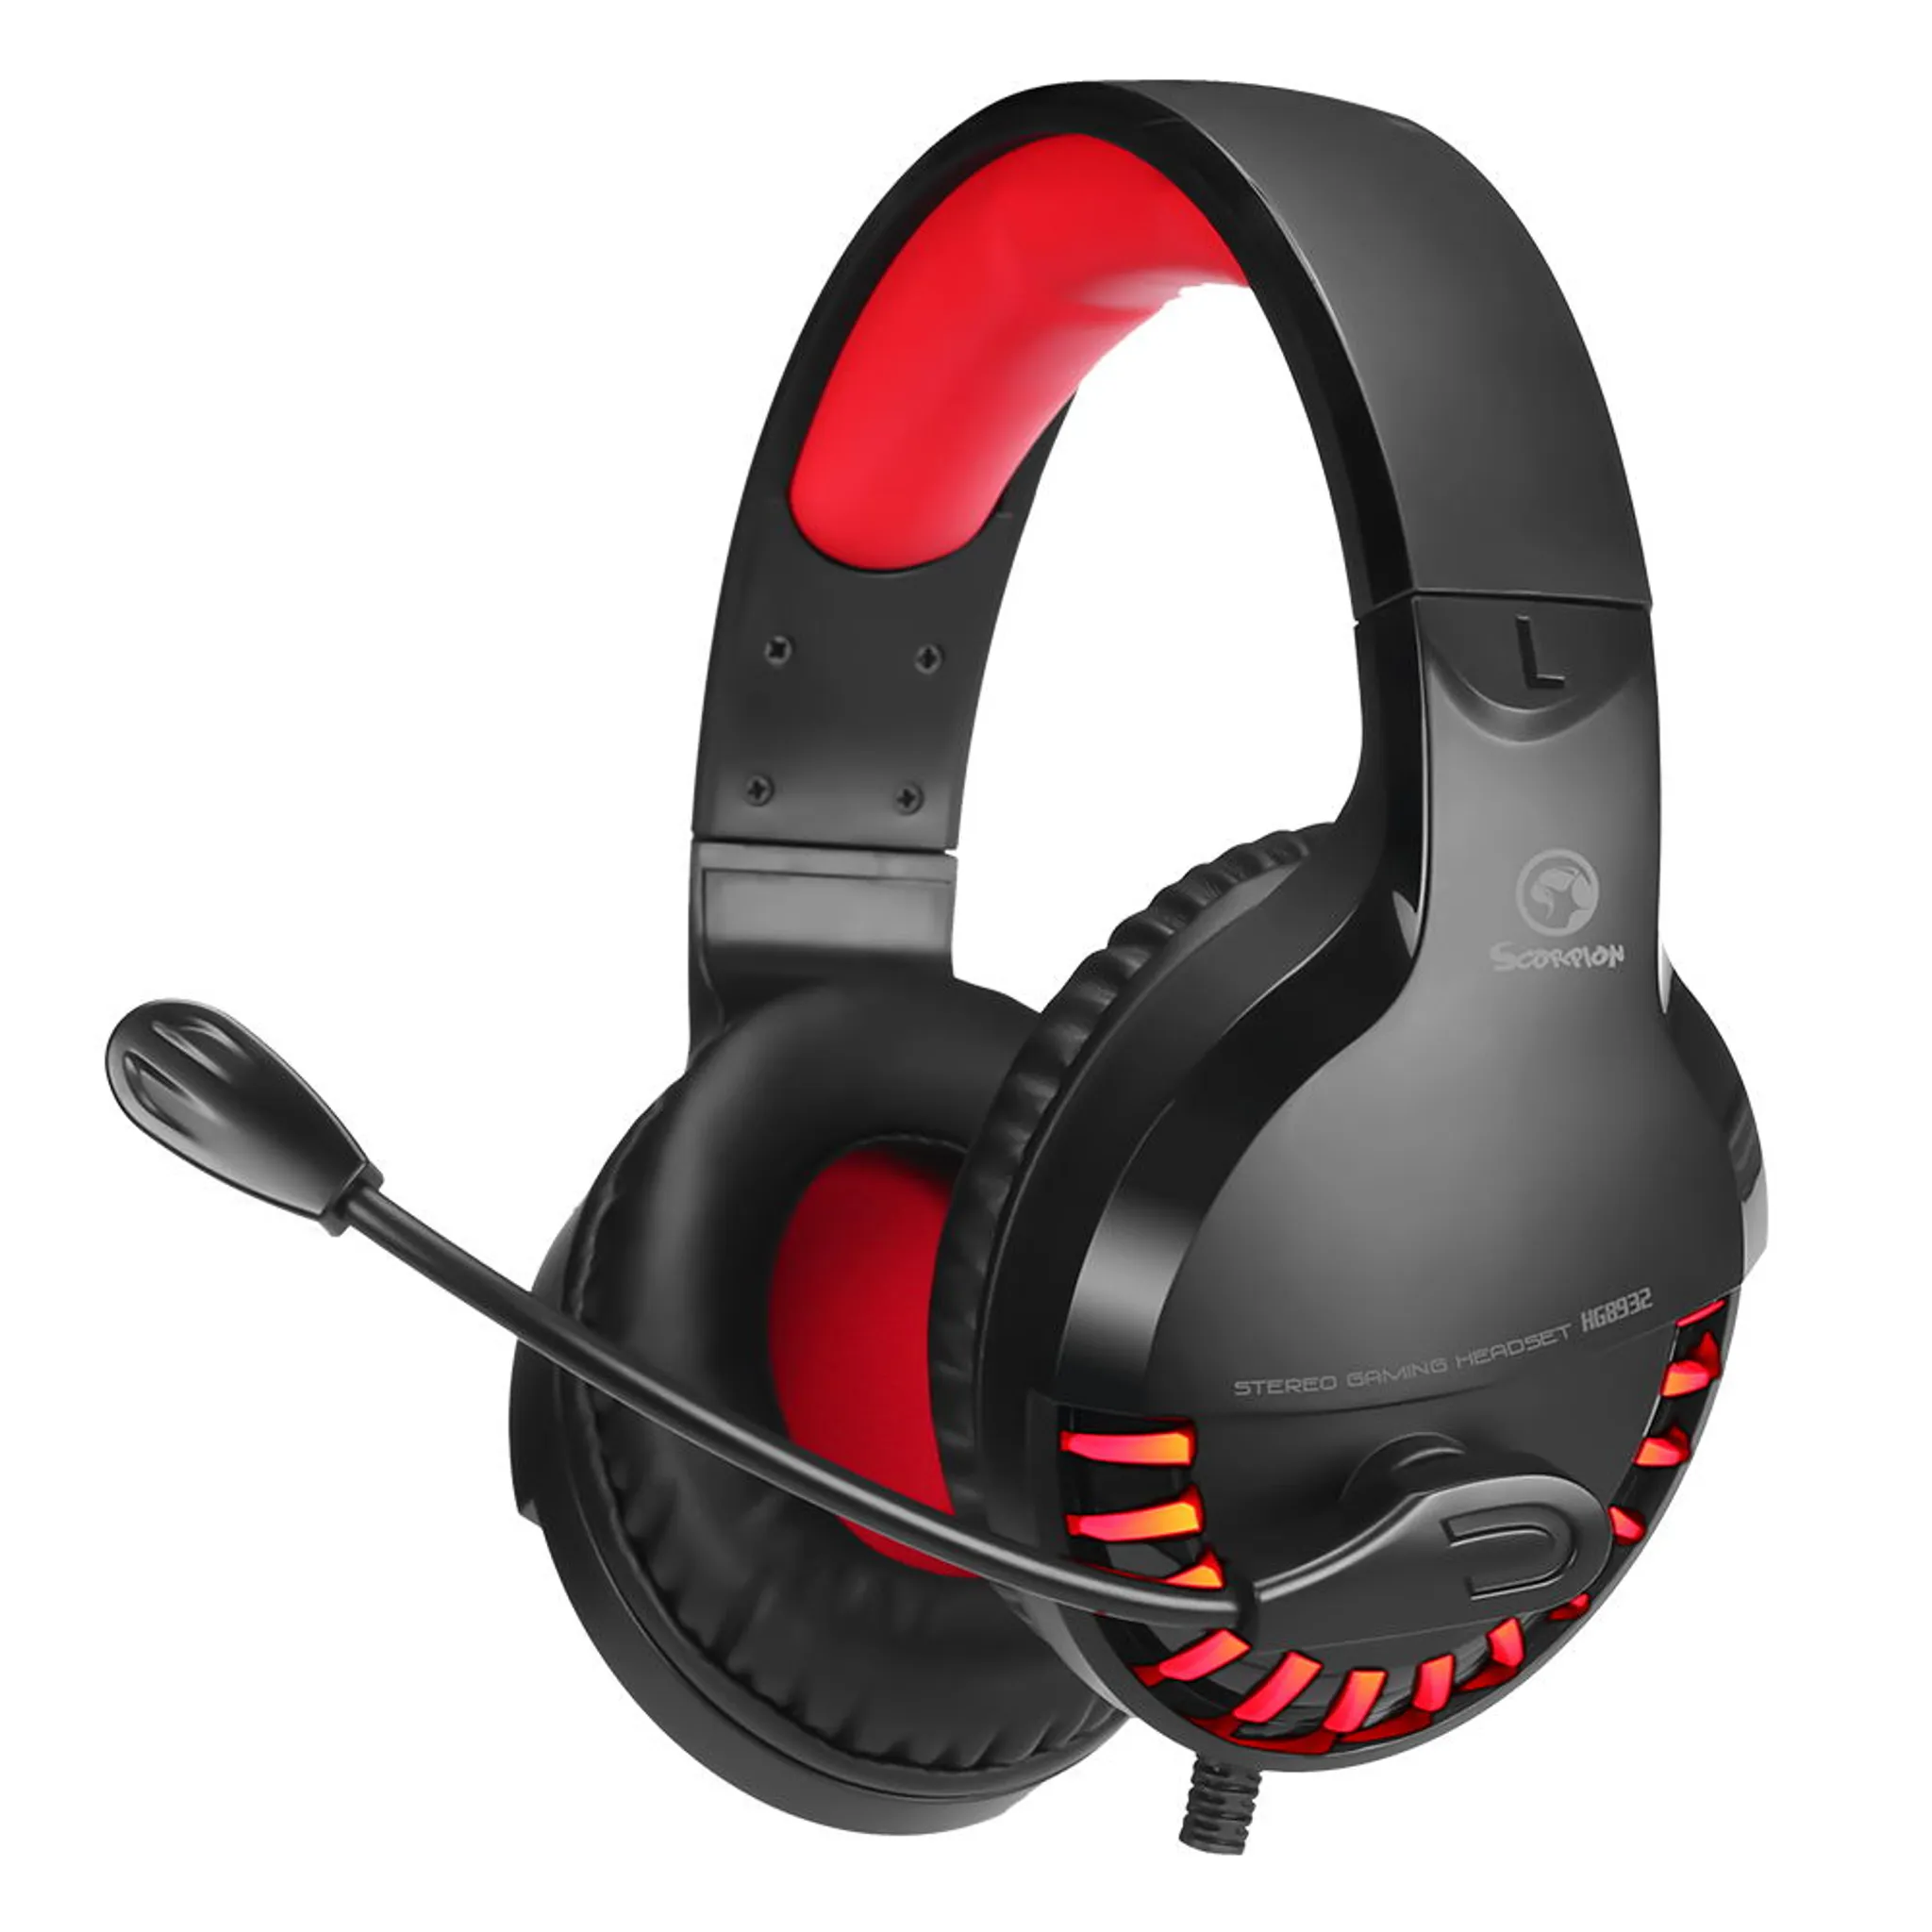 MARVO HG8932 Headset, Wired Gaming